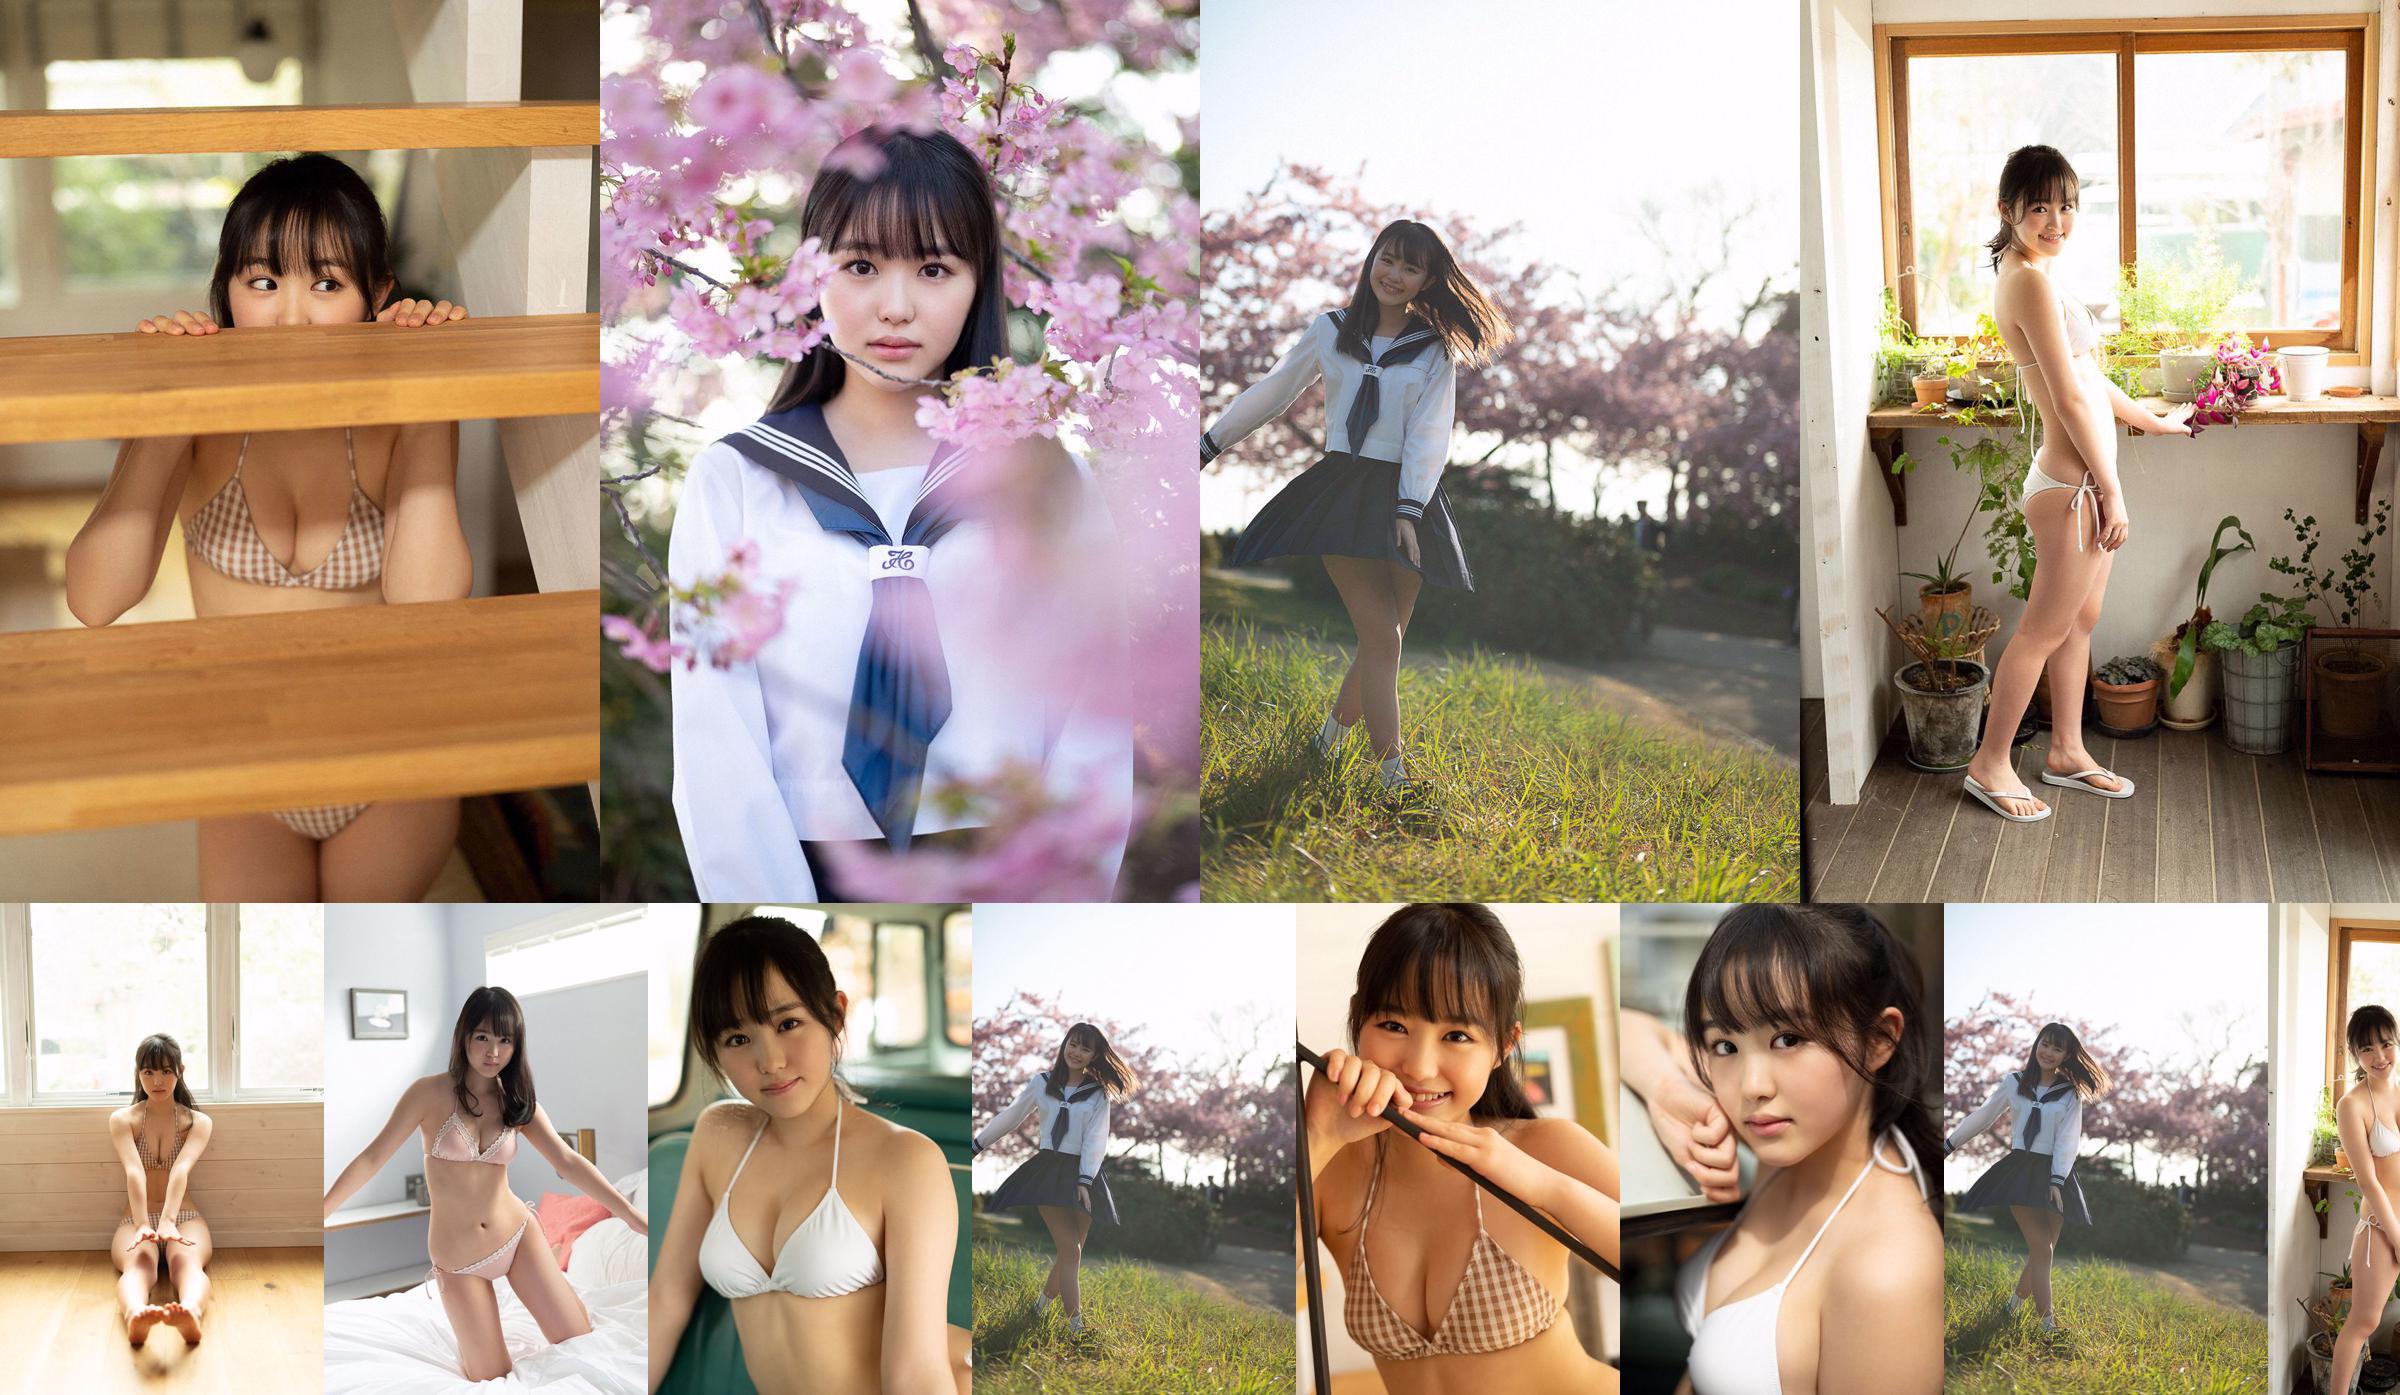 Koharu Ito "Come in Spring." [WPB-net] EXtra810 No.412bfe Page 2